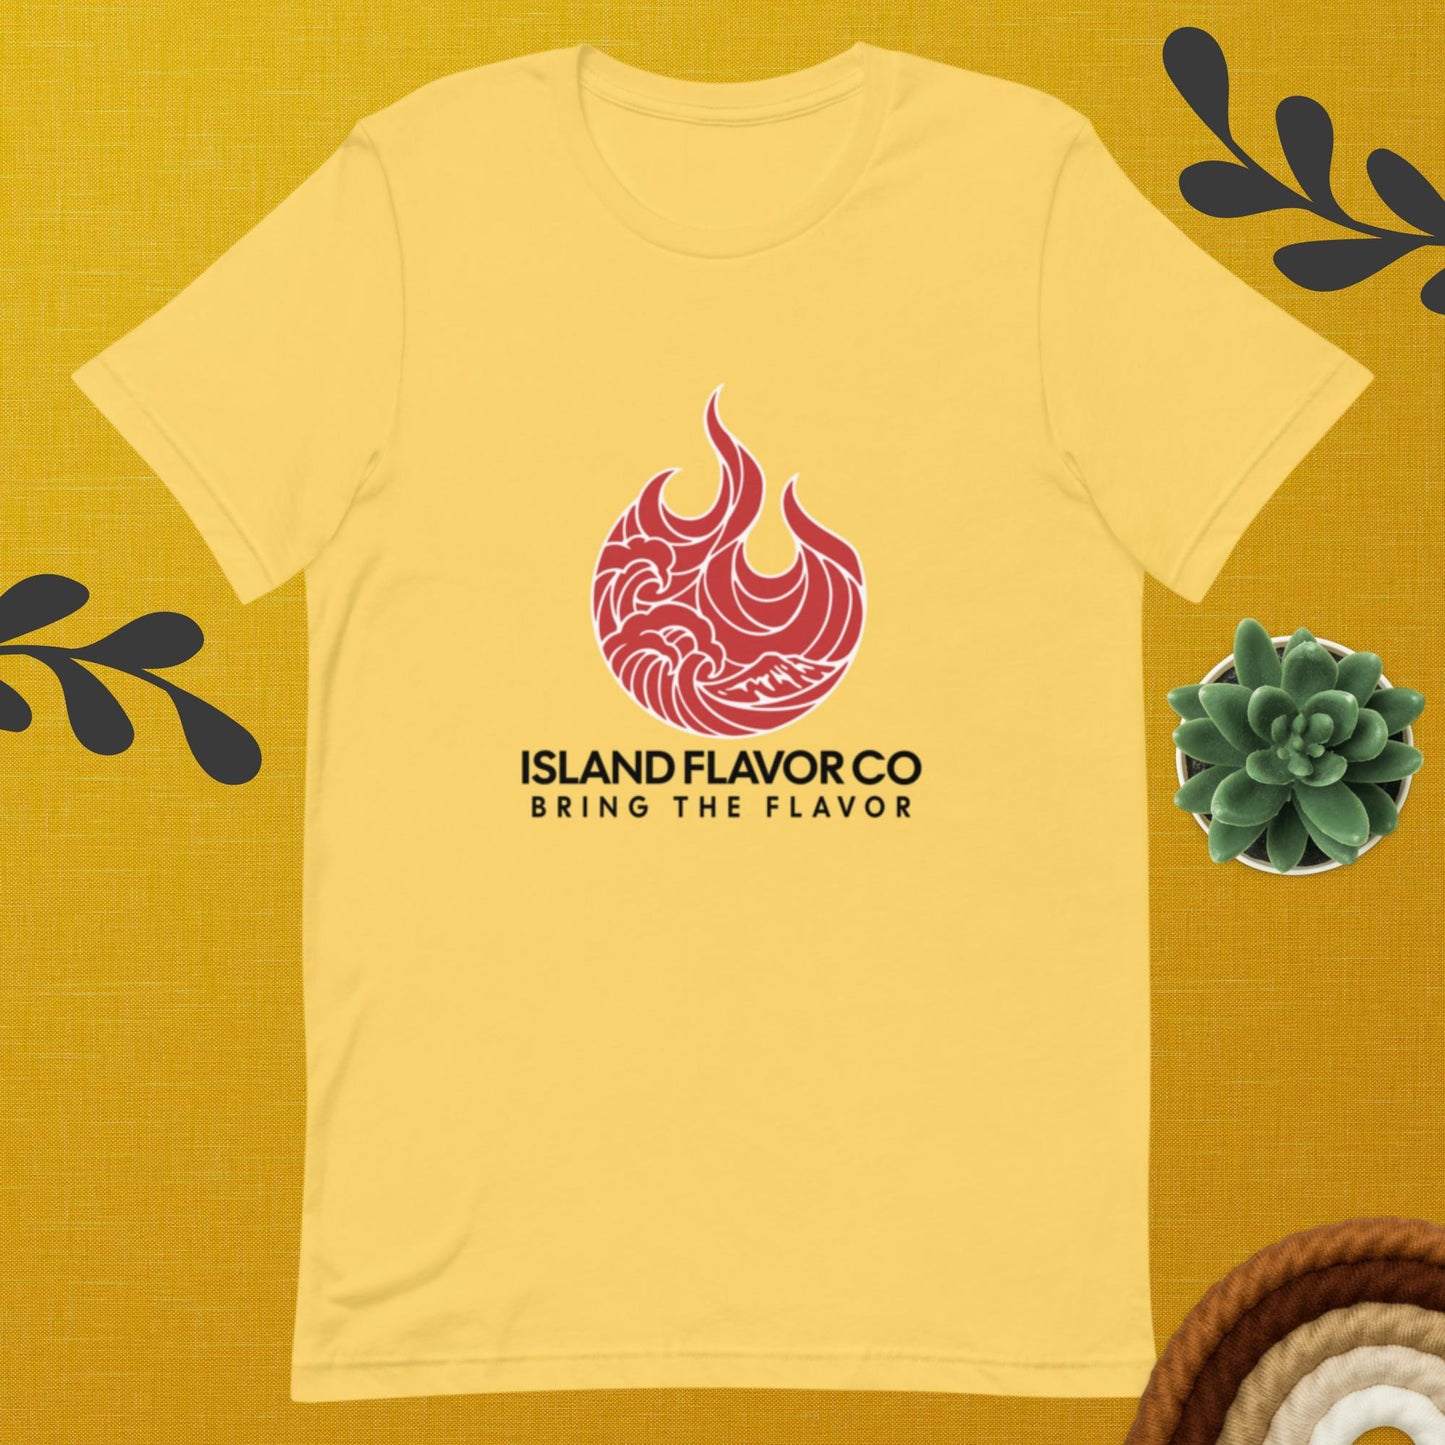 Strawberry Pig wood chip label T-shirt from Island Flavor Co.